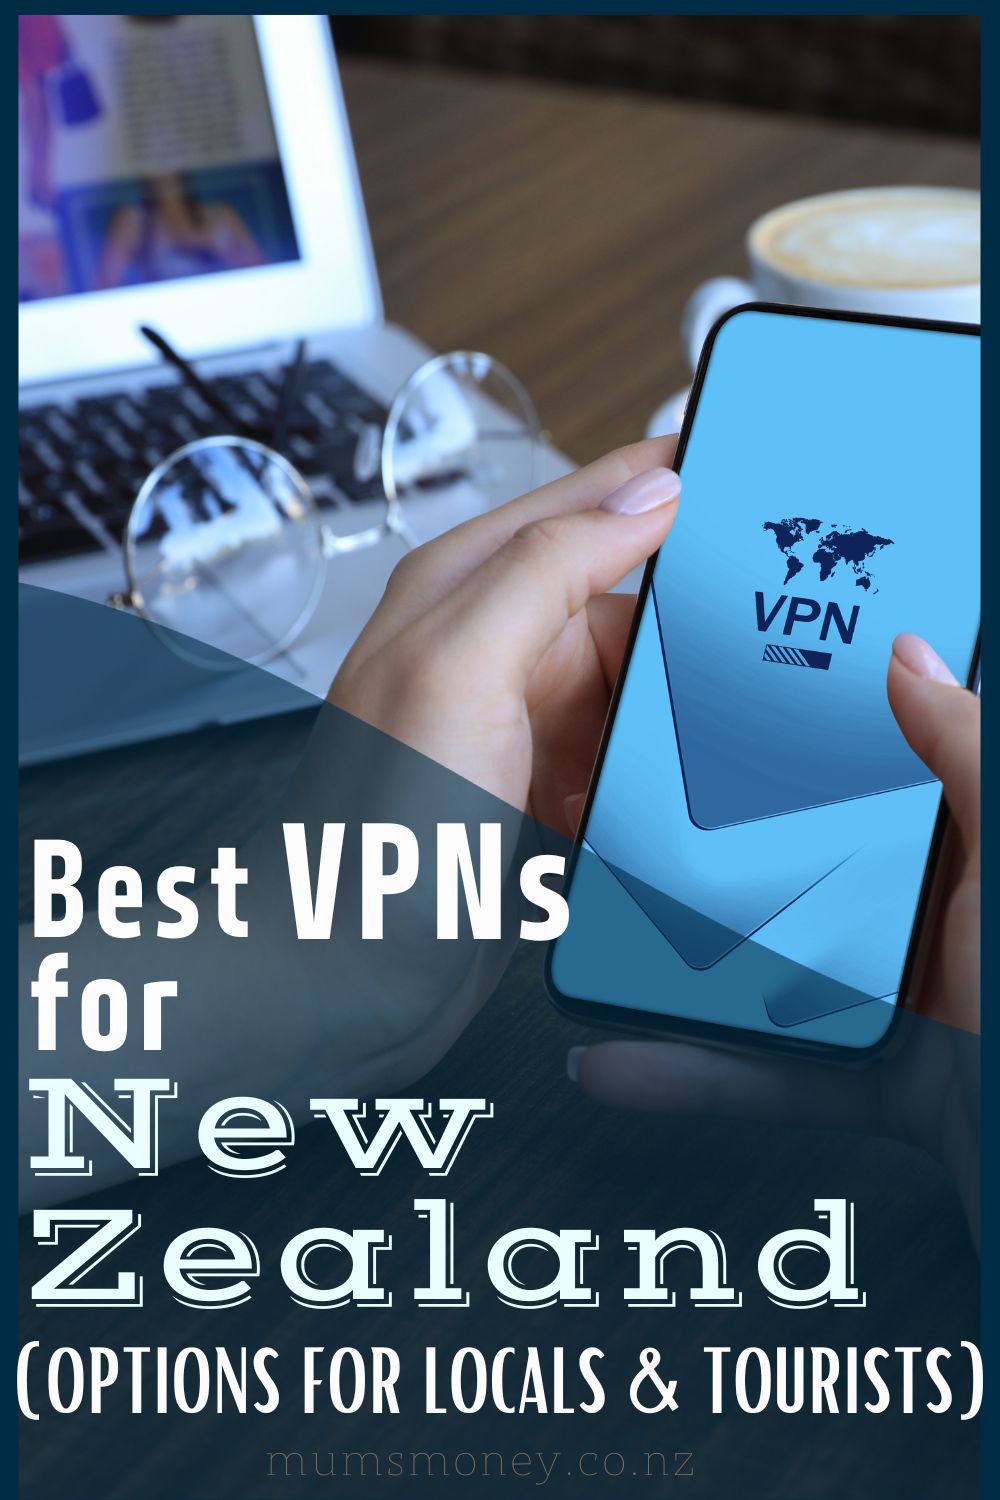 Best VPNs for New Zealand (Options for Locals & Tourists) Pin Image